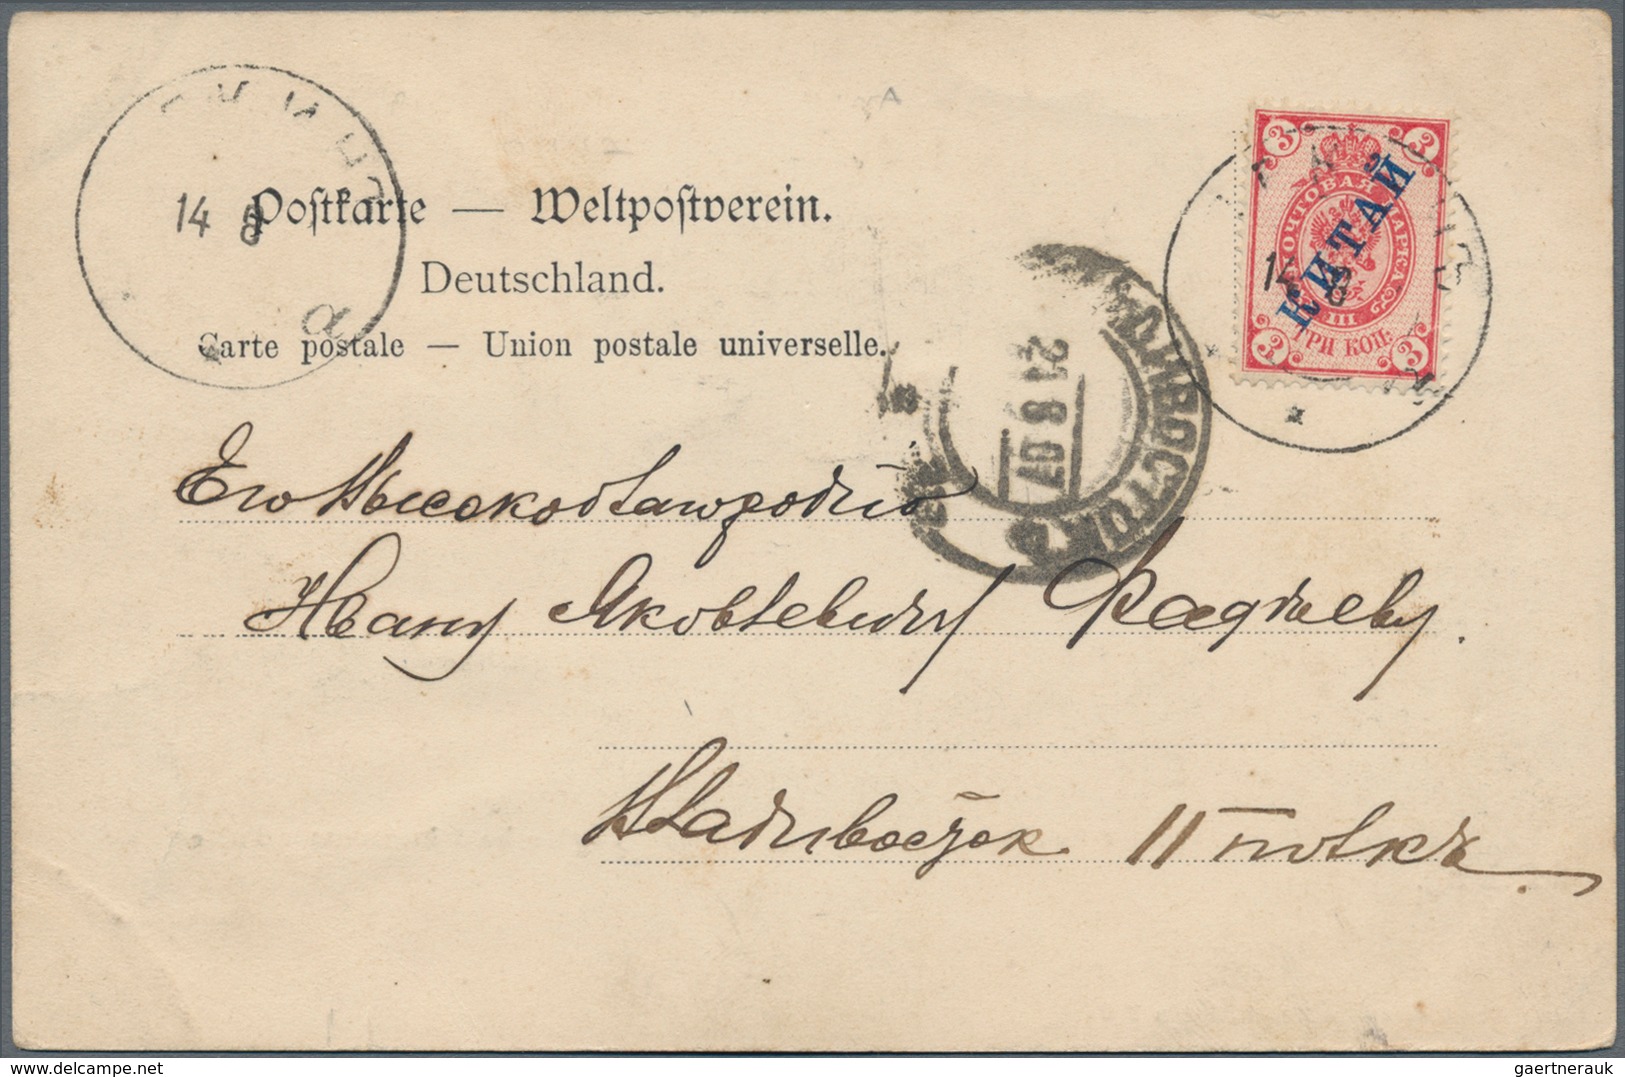 Russische Post in China: 1899, five ppc with used from Shanghai (3) or Peking (2) mostly 4 K. franki